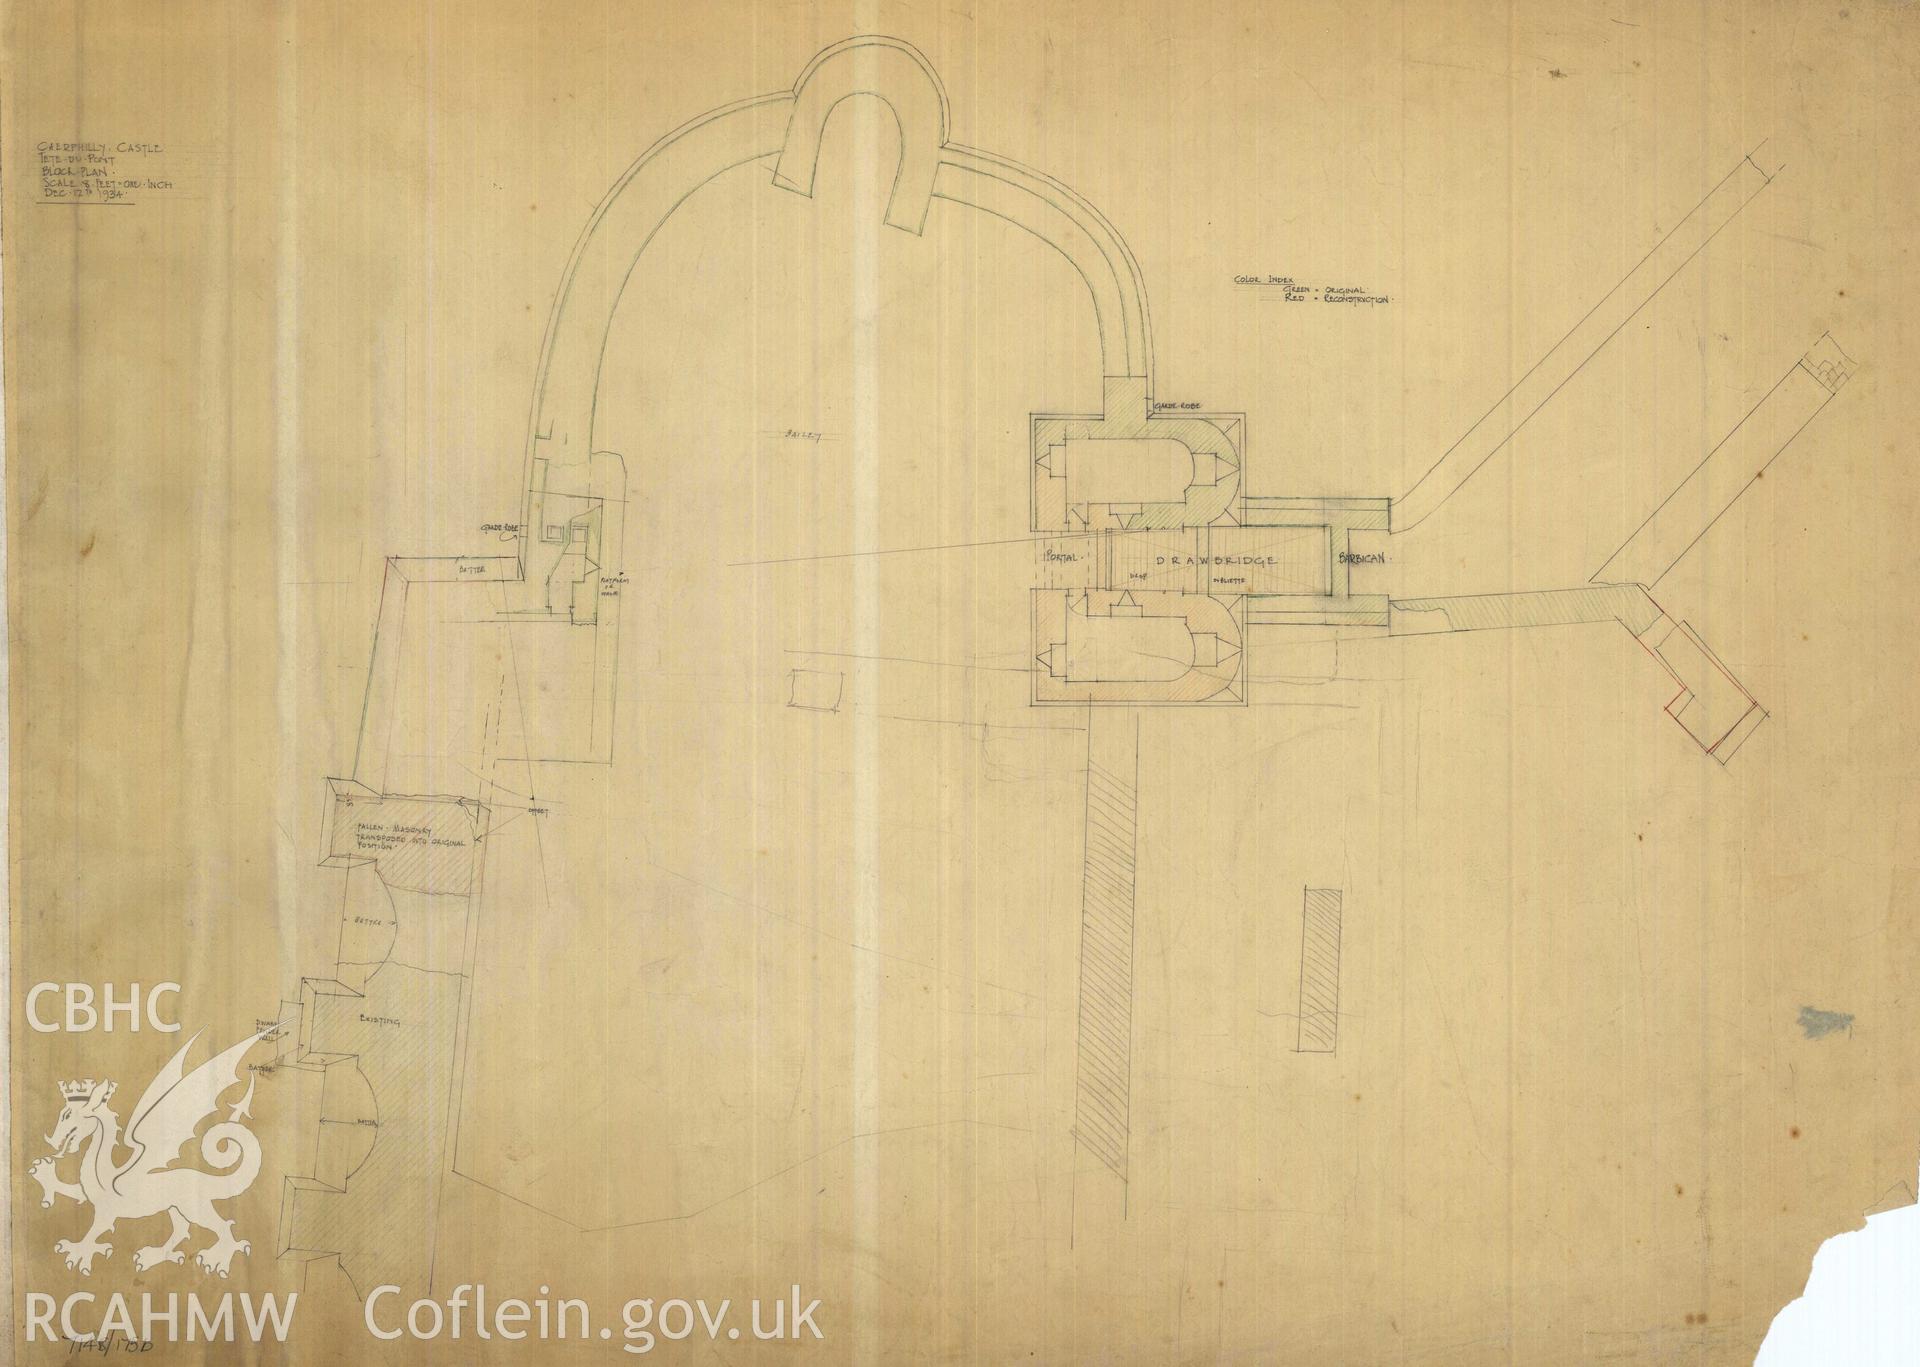 Cadw guardianship monument drawing of Caerphilly Castle. Dam, S part, general plan (i). Cadw Ref. No:714B/175b. Scale 1:96.